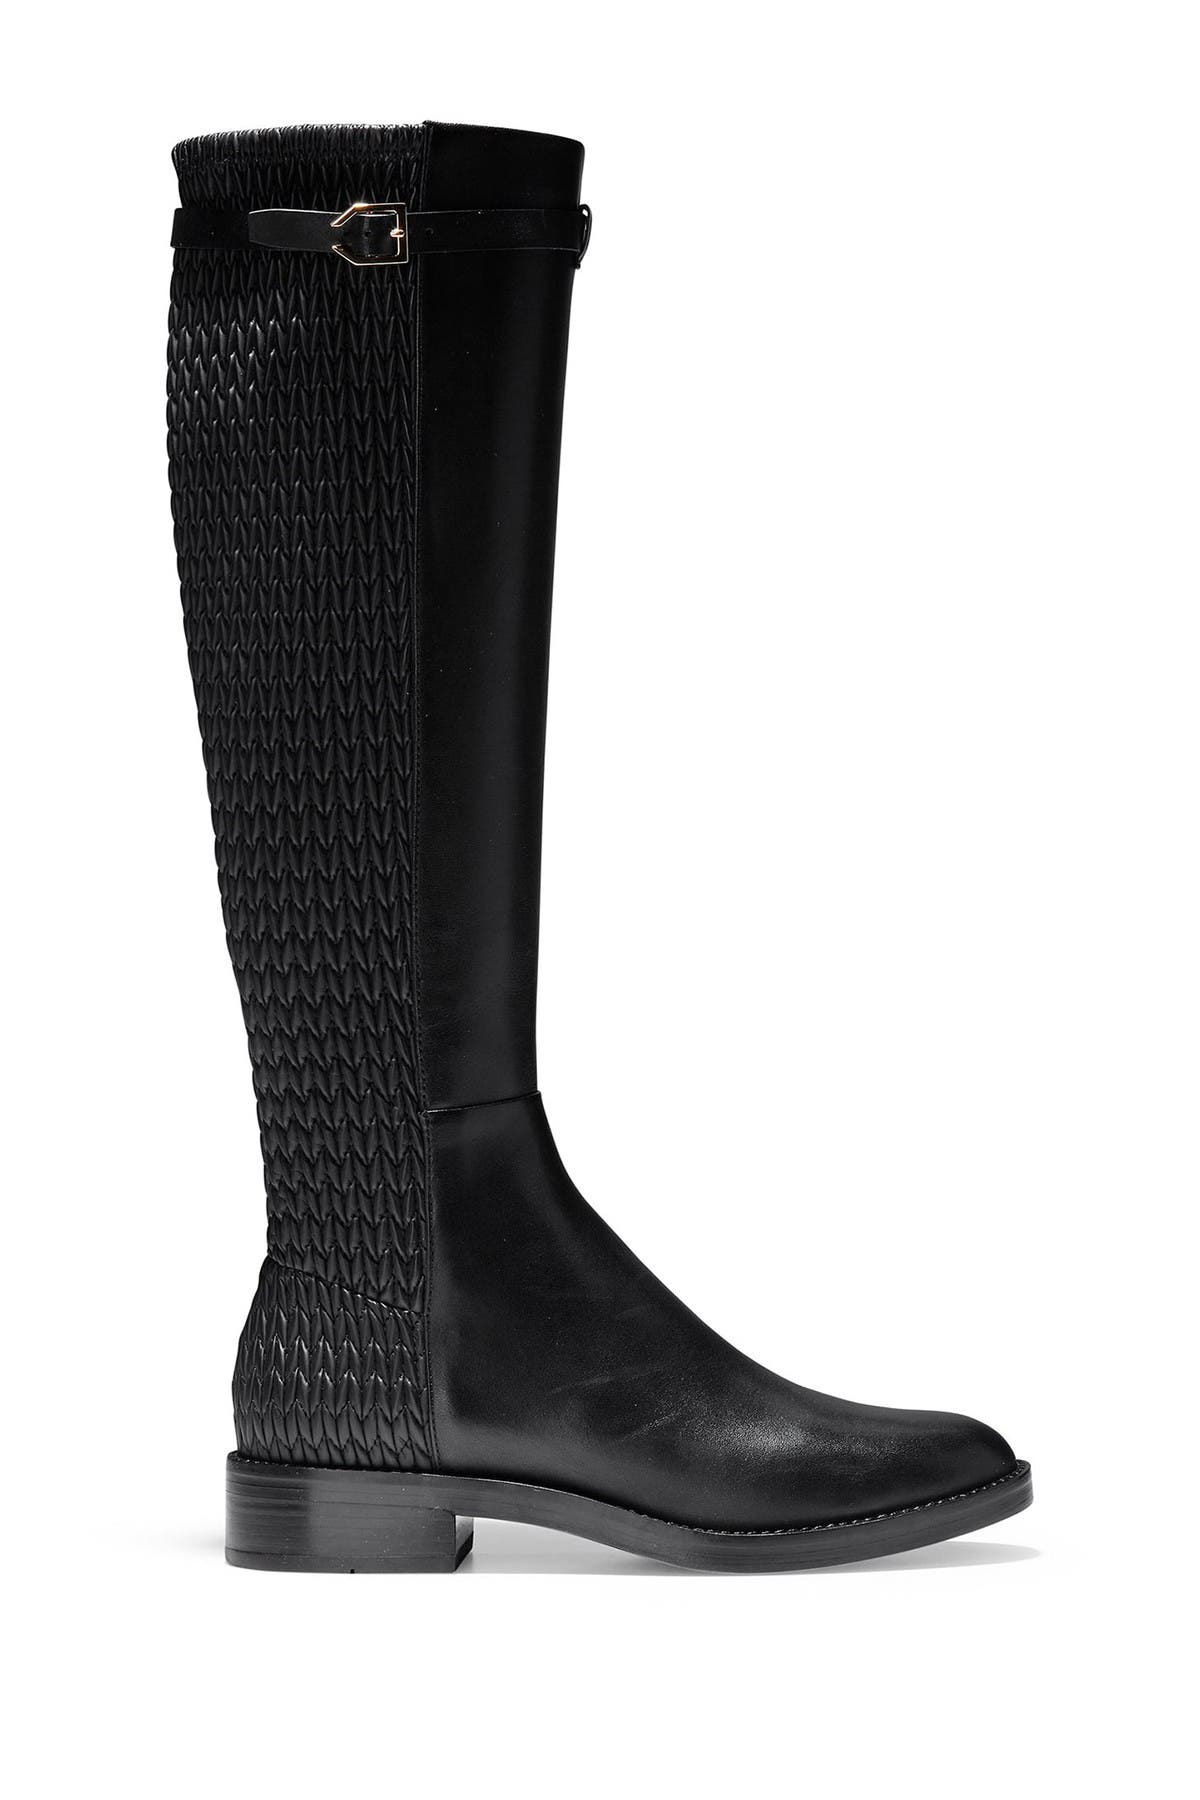 lexi grand knee high stretch boot cole haan